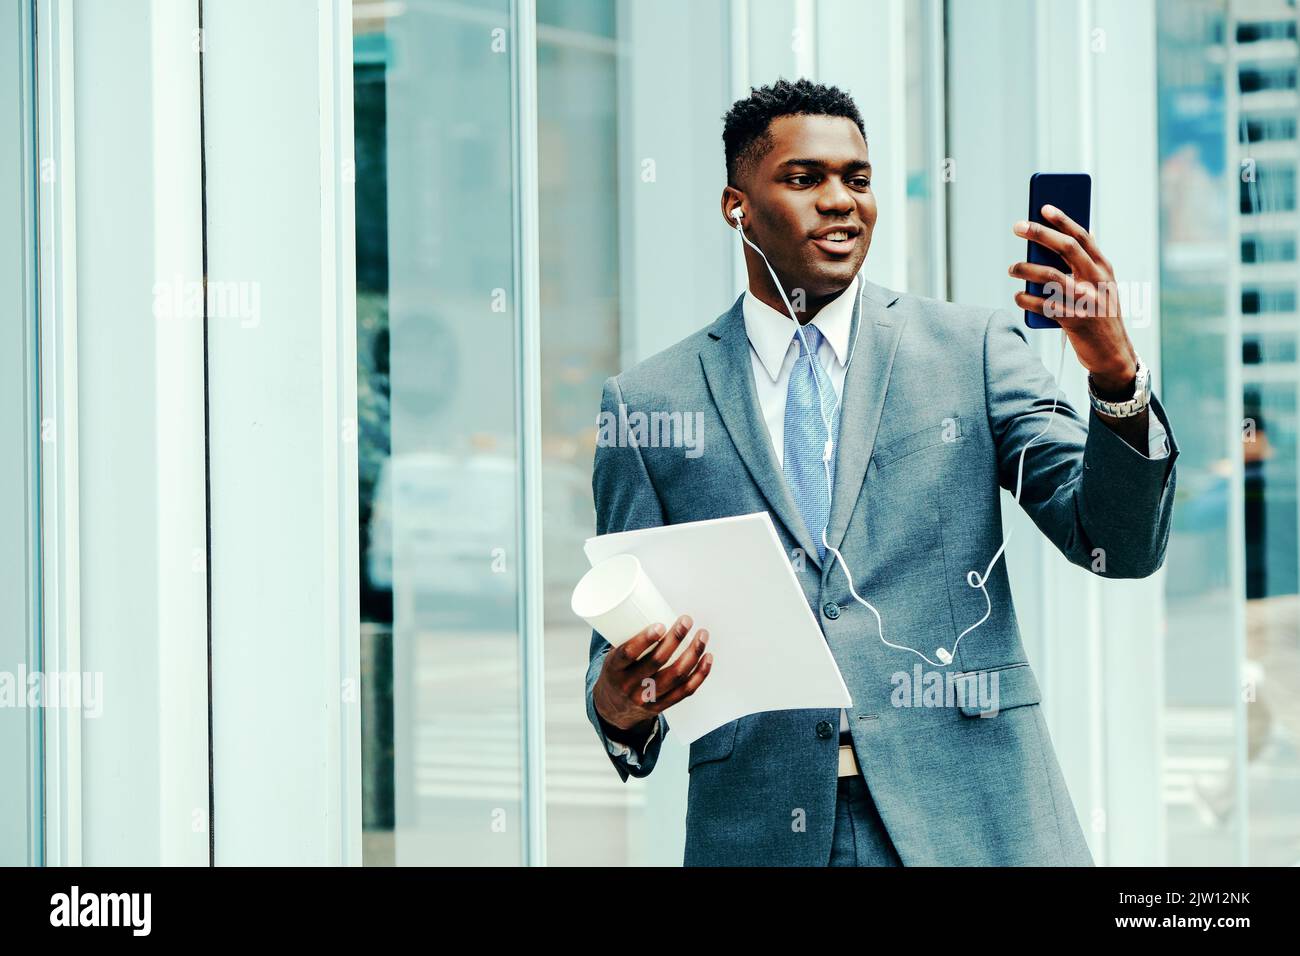 Positive young entrepreneur using smartphone outside wearing suit and tie Stock Photo